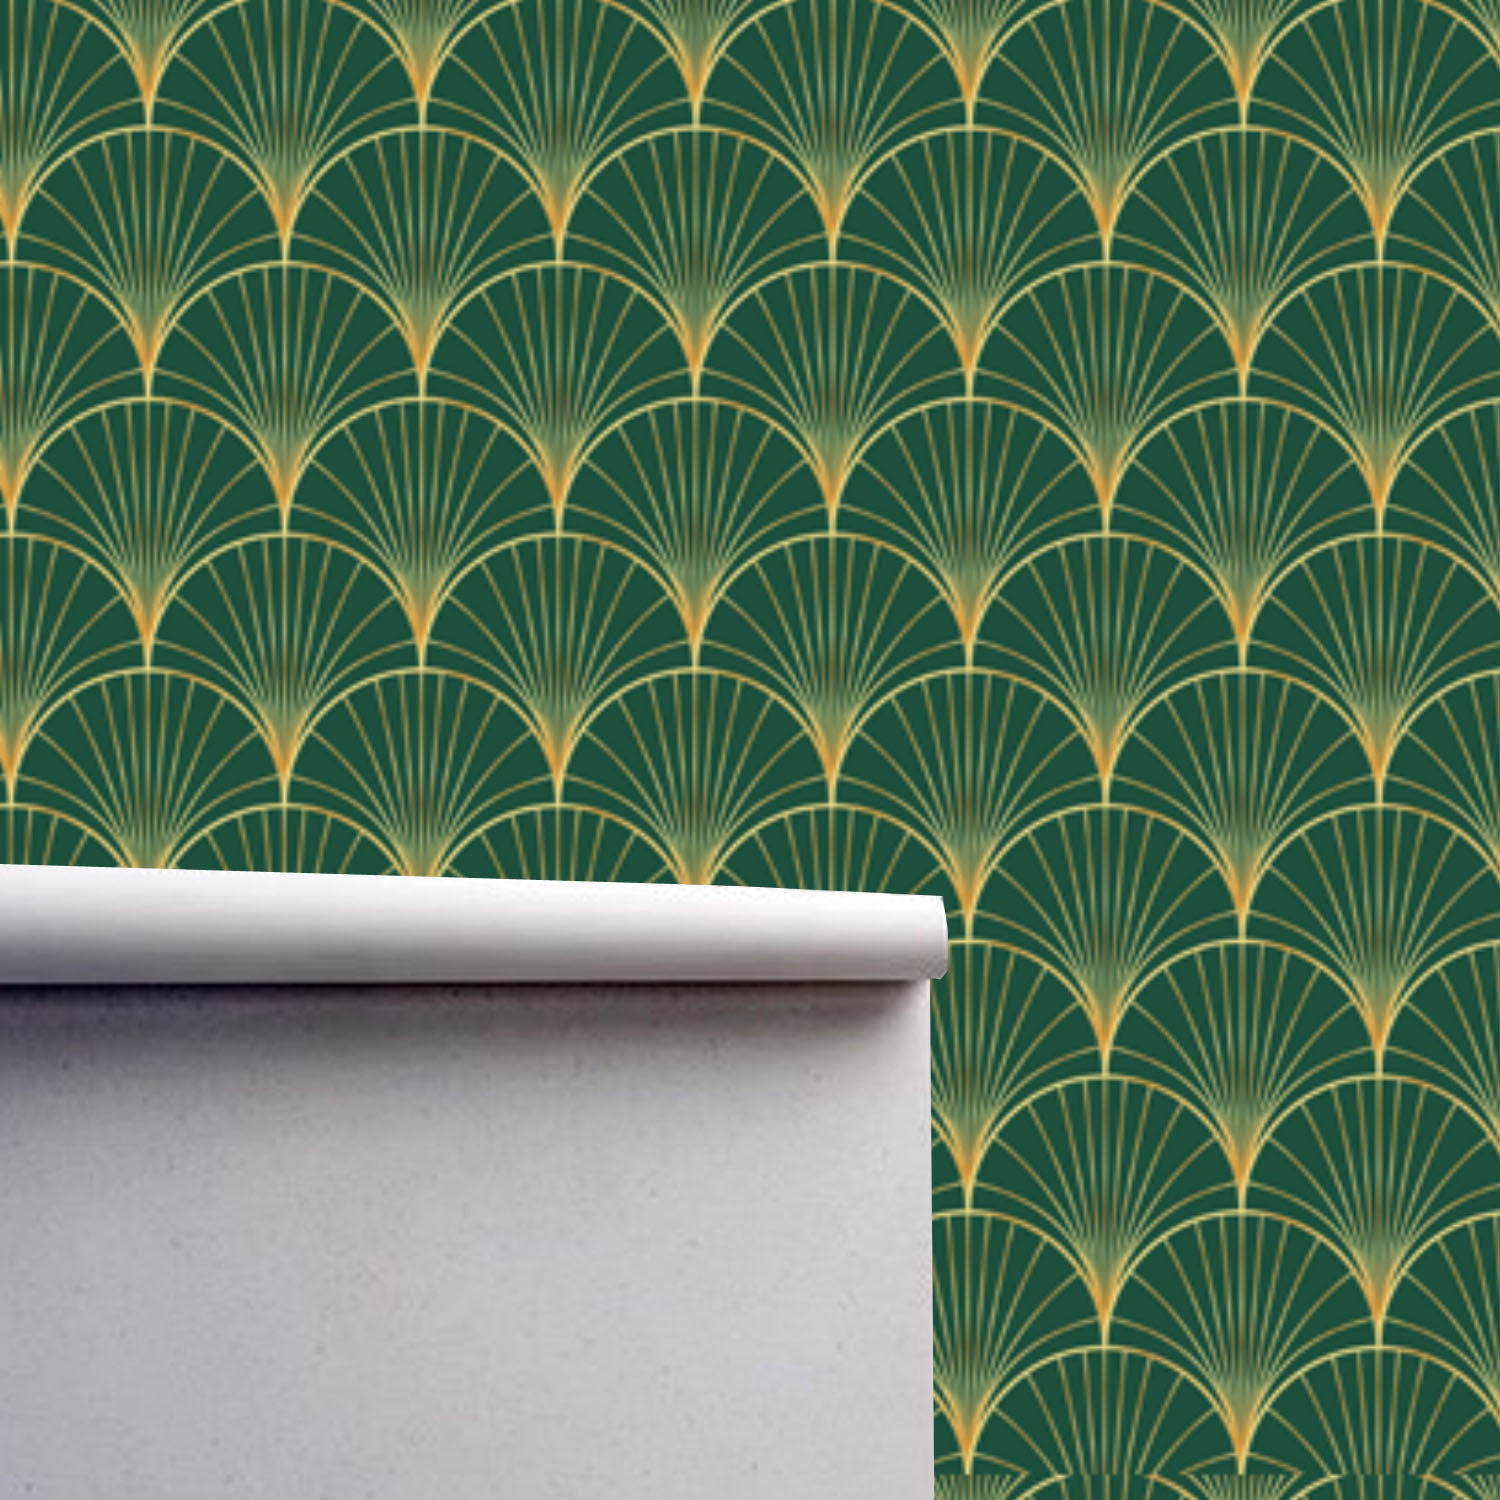 Albums 100+ Images green and gold art deco wallpaper Completed